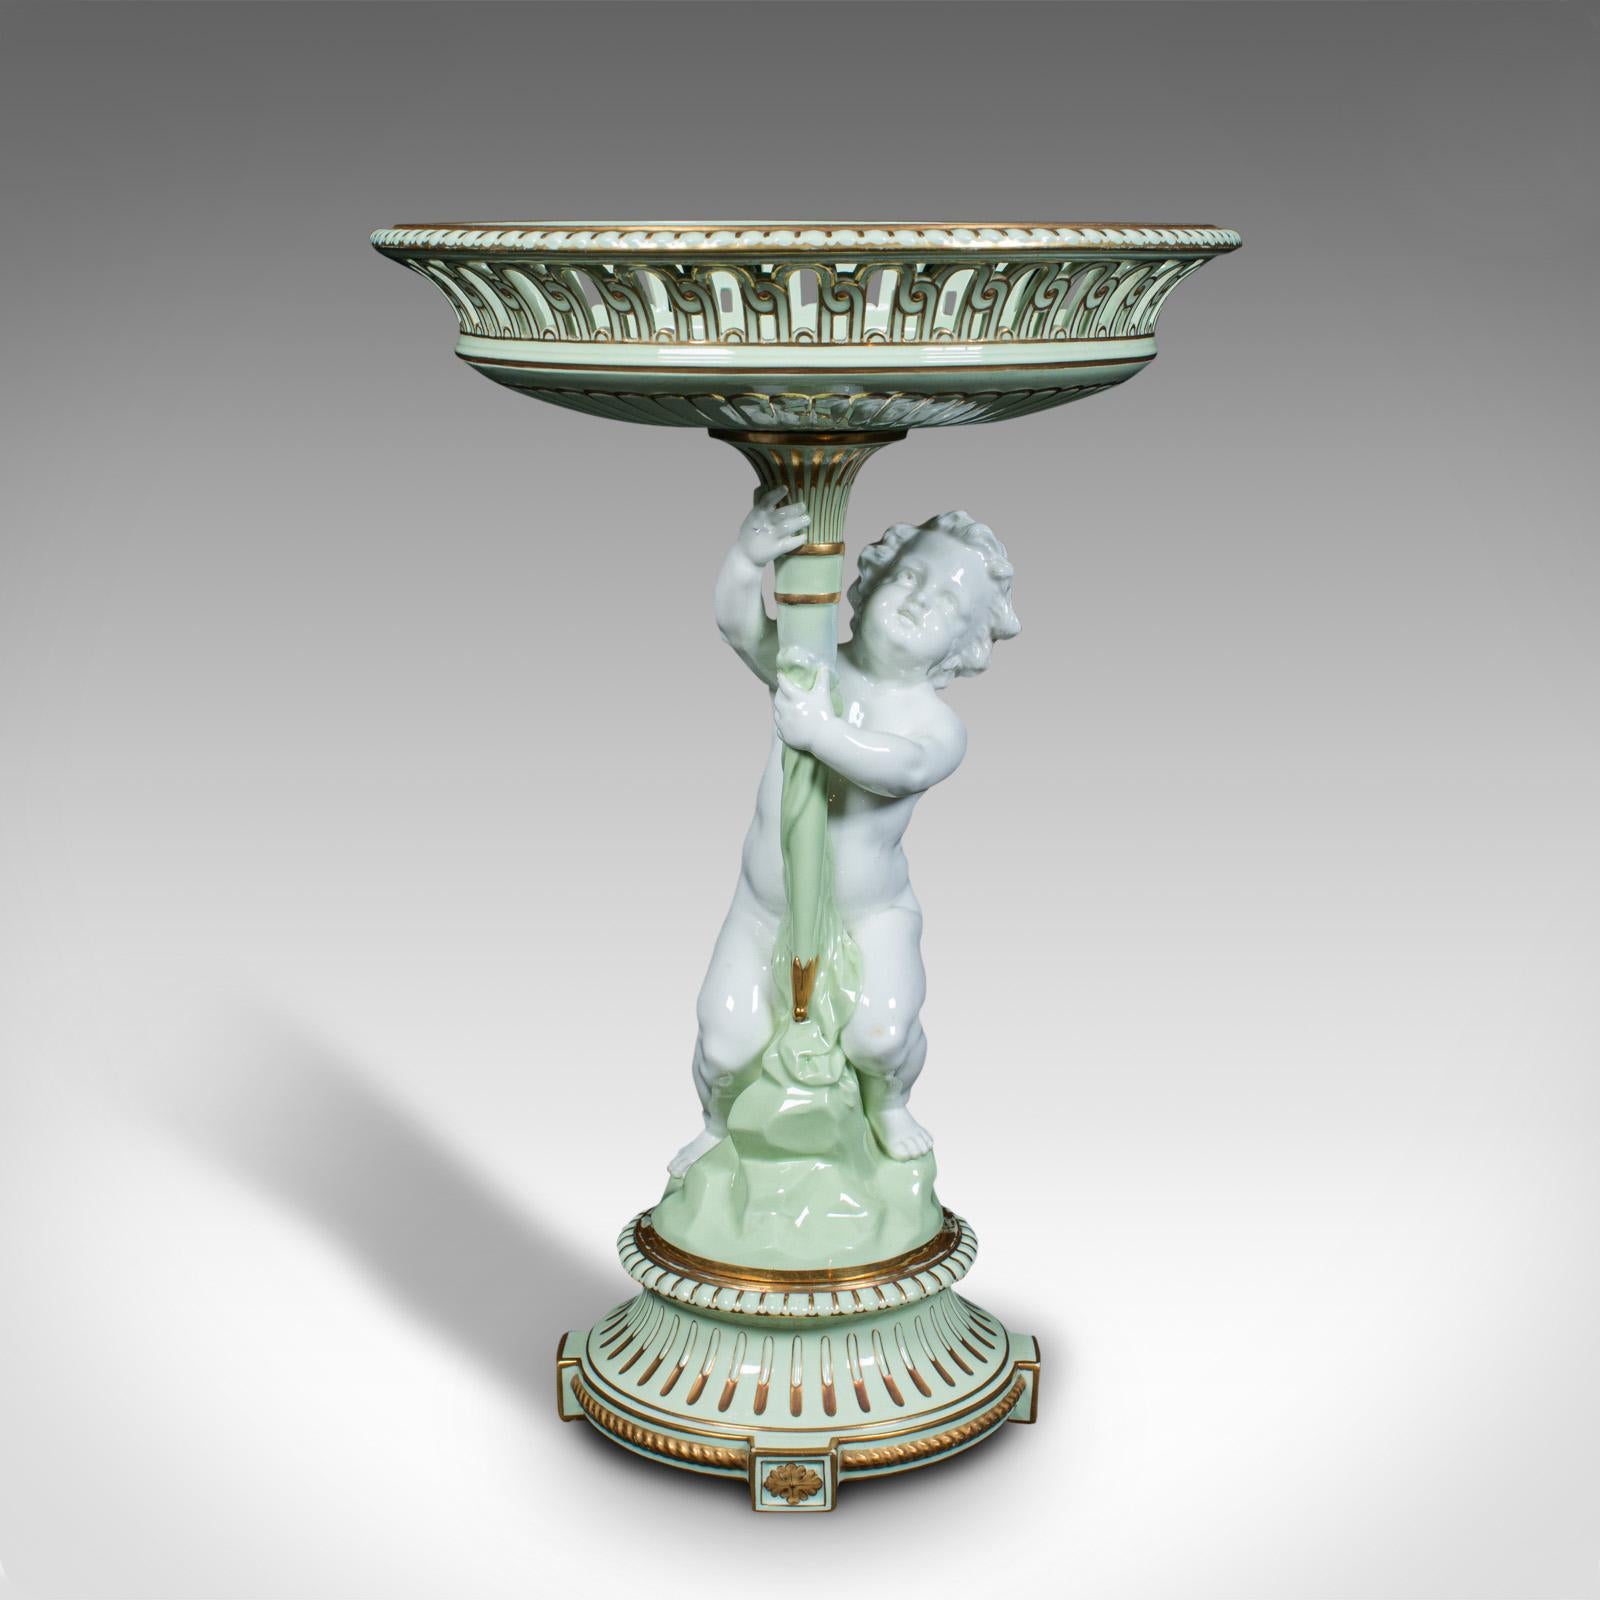 This is an antique cherub compote dish. An English, ceramic decorative putti grape bowl, dating to the Victorian period, circa 1880.

Of bold, cherubic form and generous proportion
Displays a desirable aged patina and in very good order
Ceramic